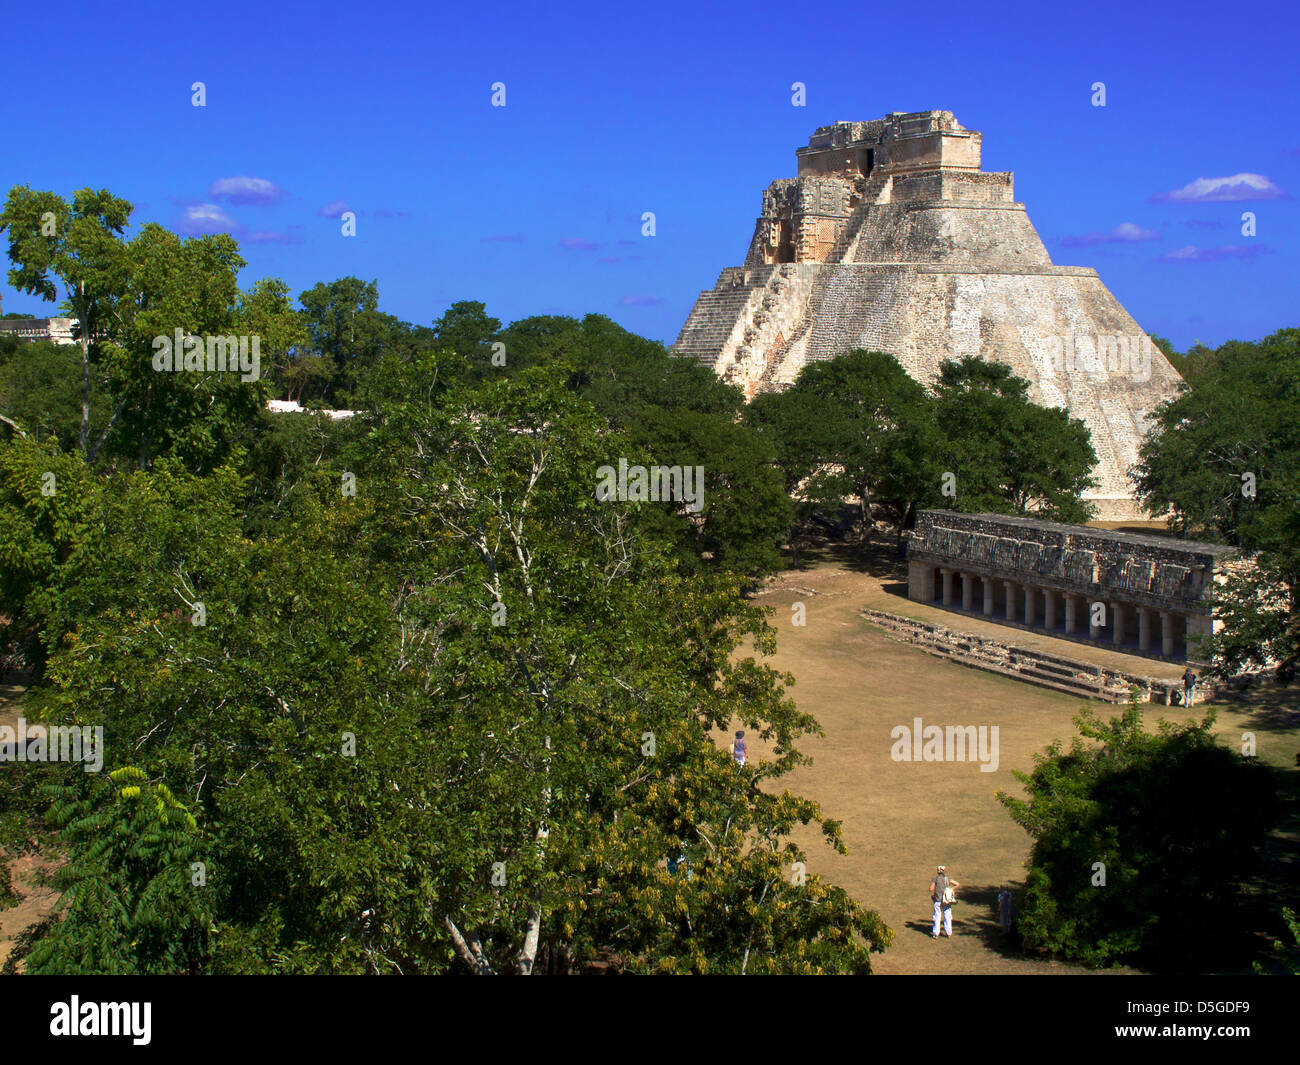 The Mayan ruins of Uxmal in Mexico Stock Photo